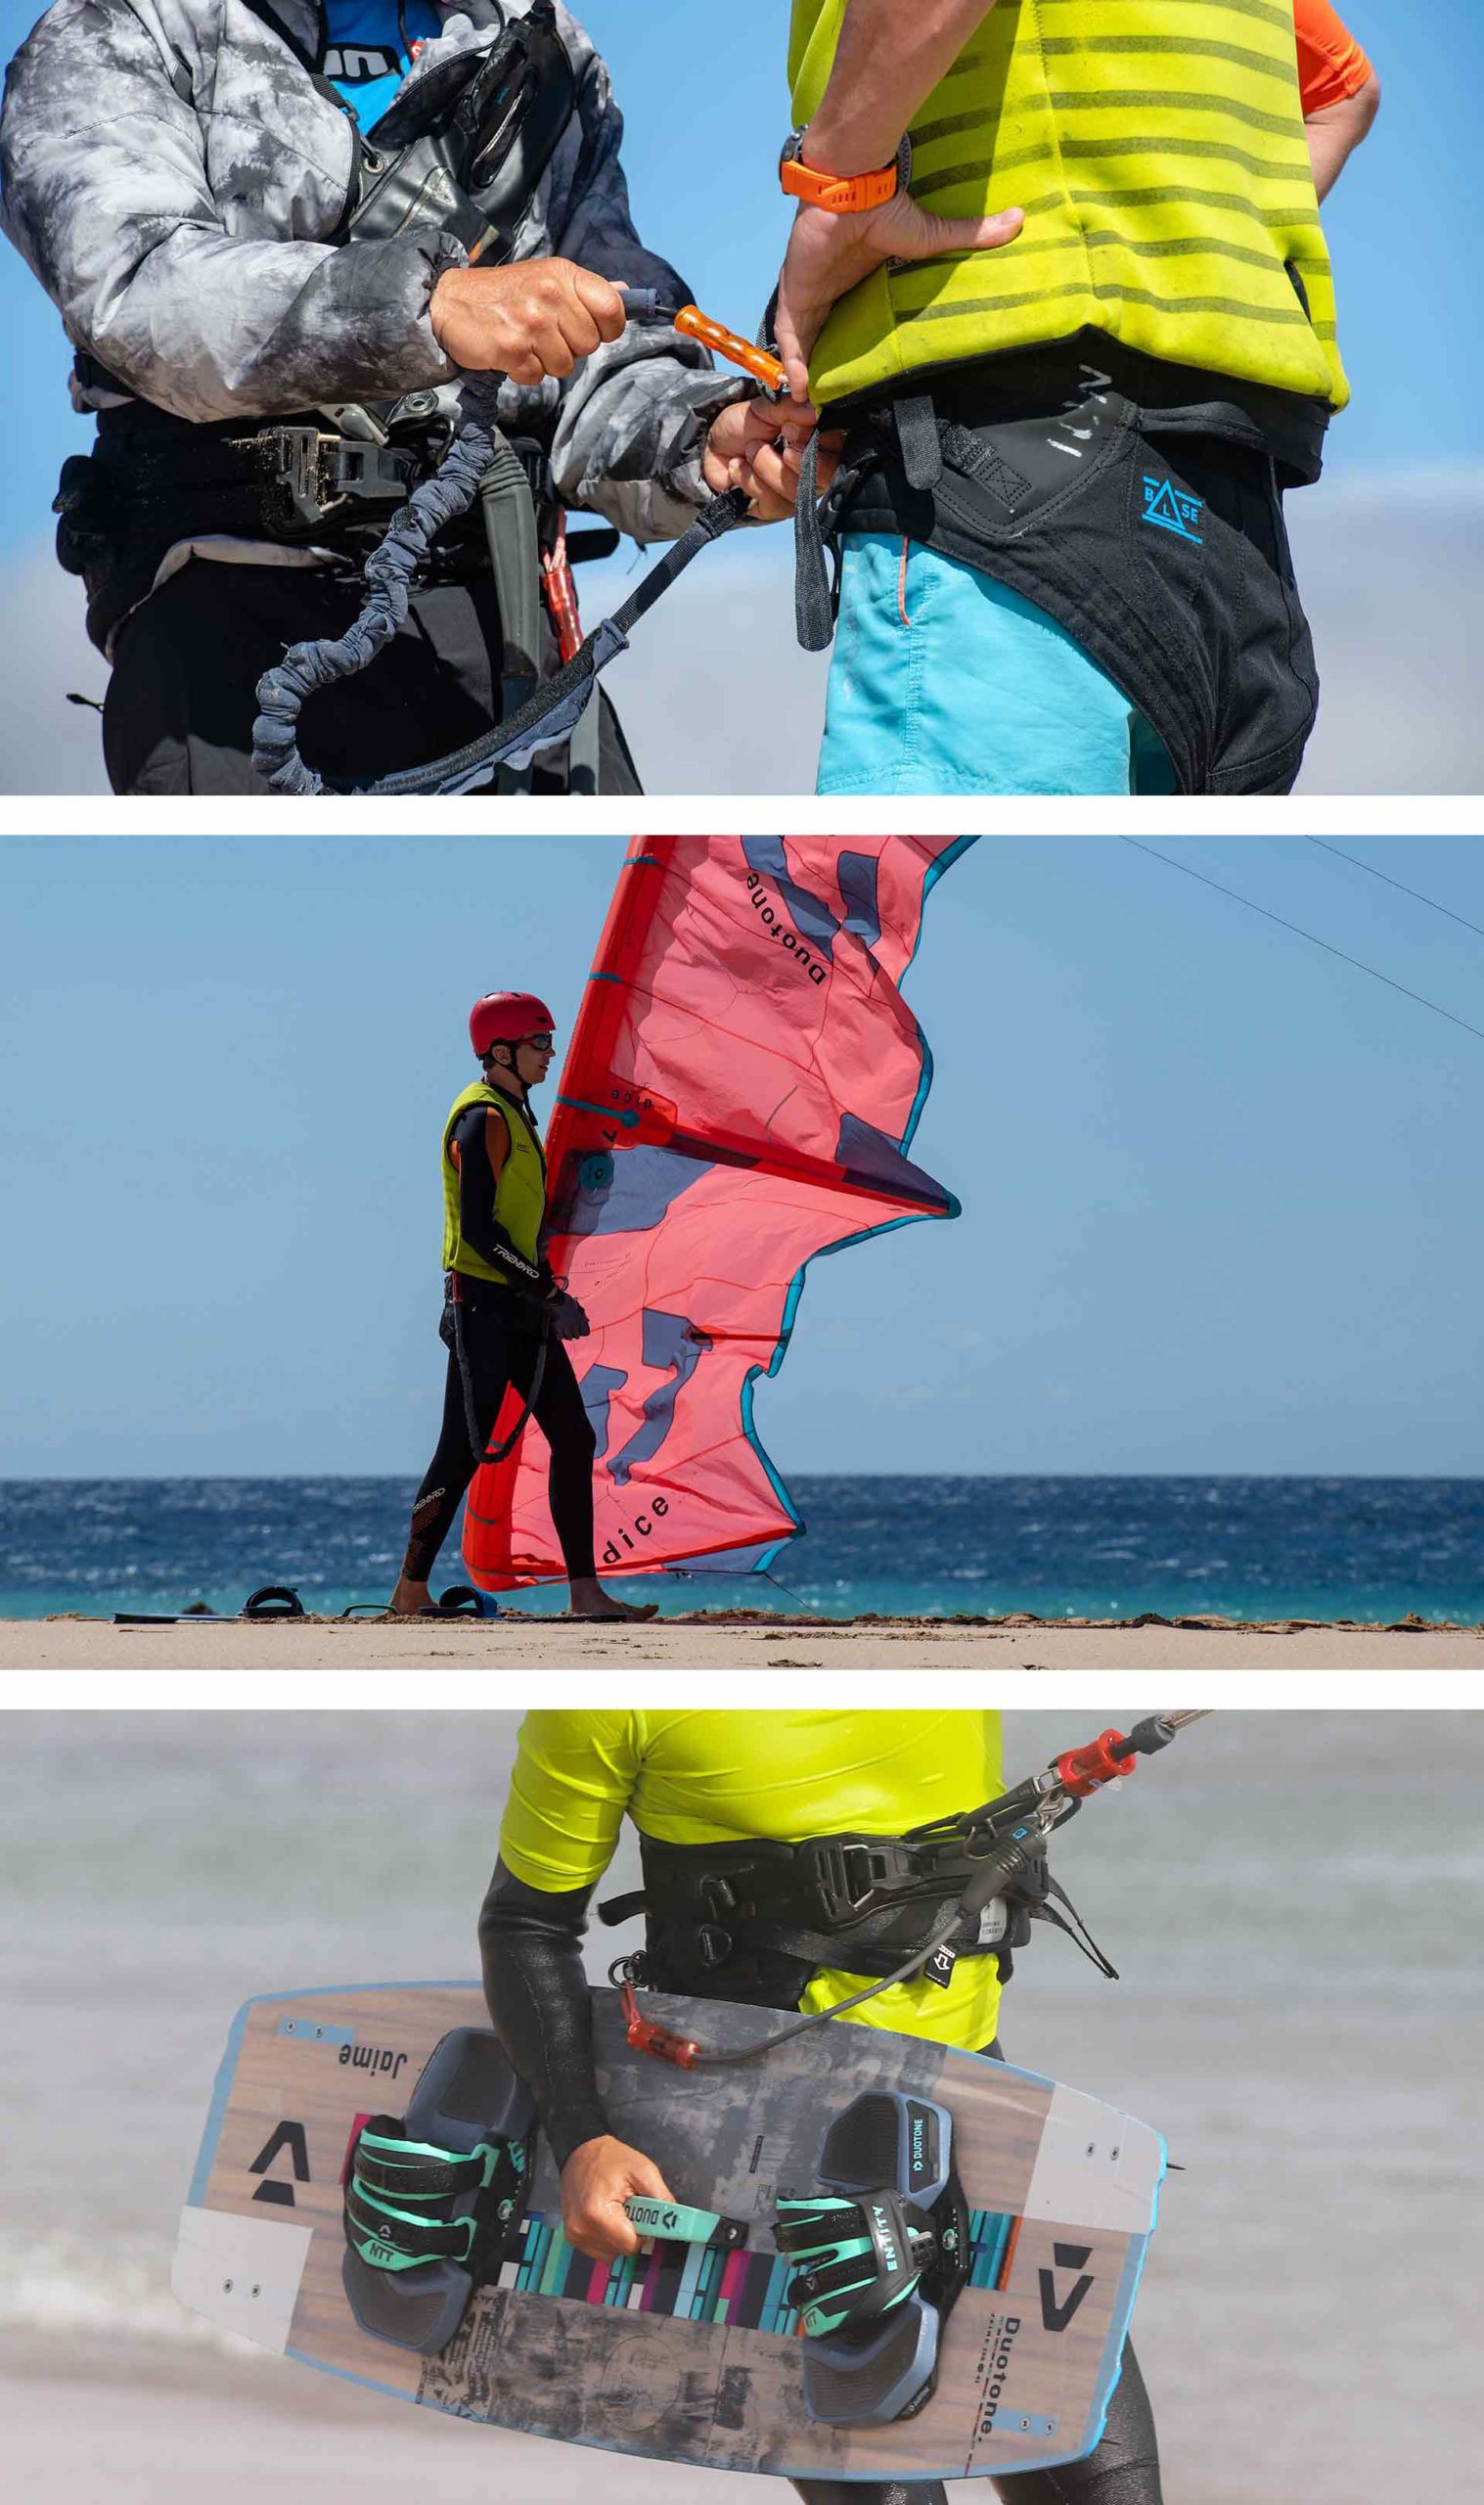 An instructor teaching how to attach the leash to the kitesurfing harness, a kitesurfing course student holding a kite and an instructor holding a kitesurfing board in order to get into the water to ride.